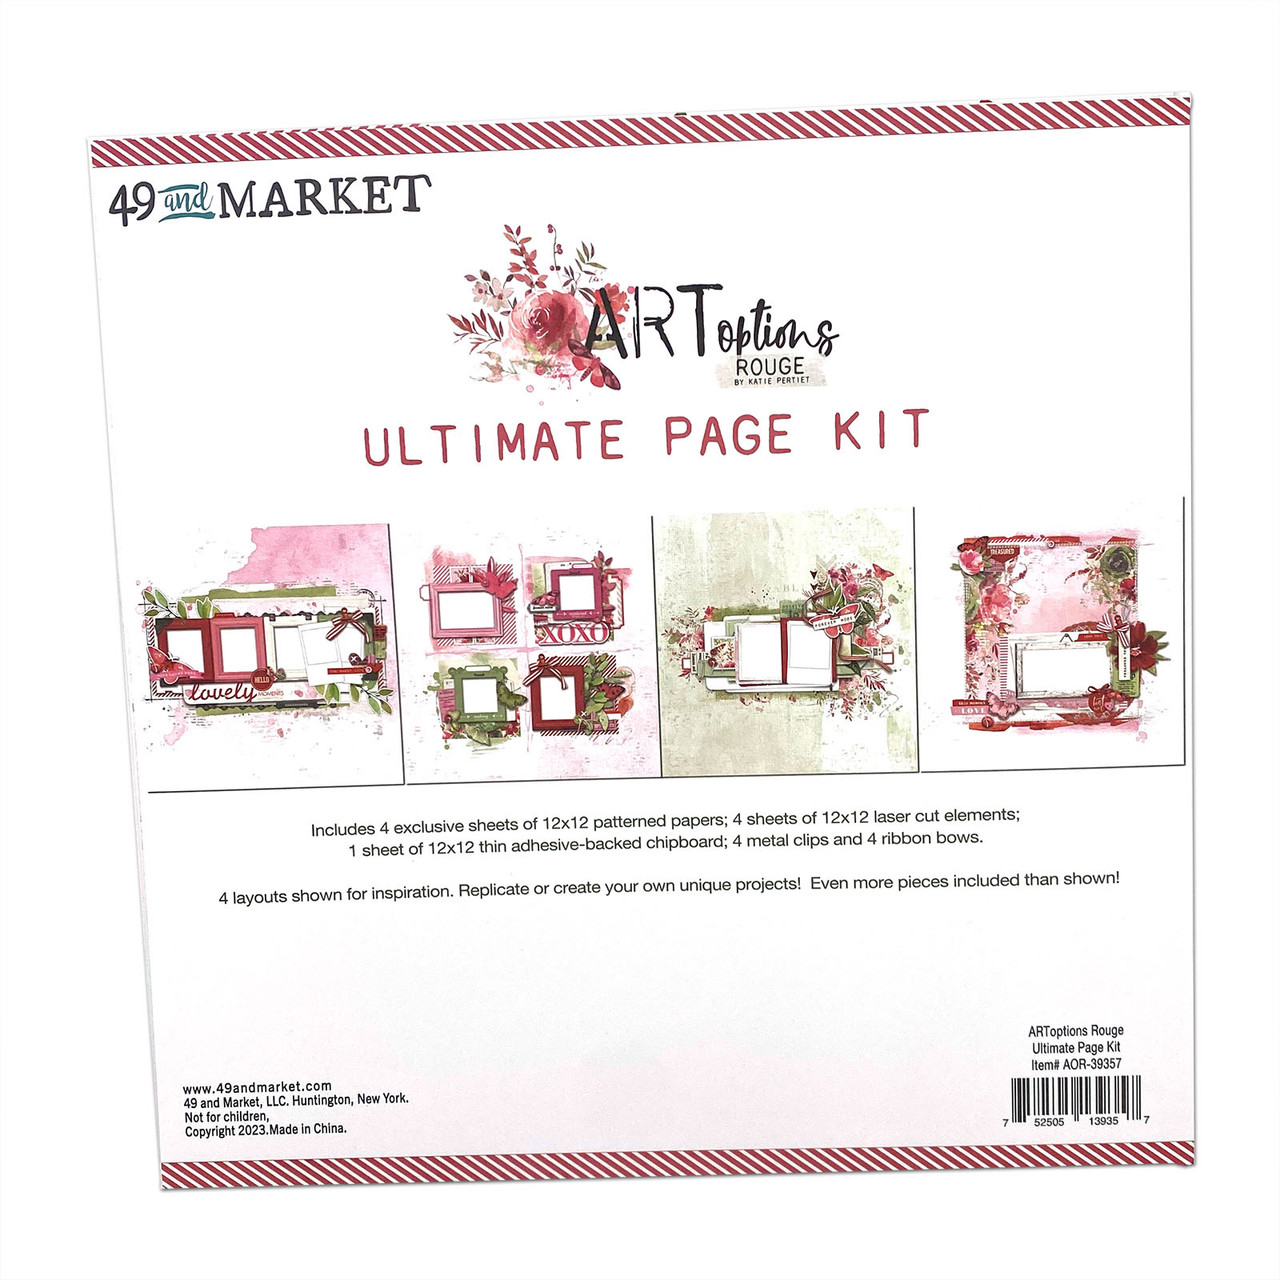 49 and Market Cluster Kit ARToptions Spice